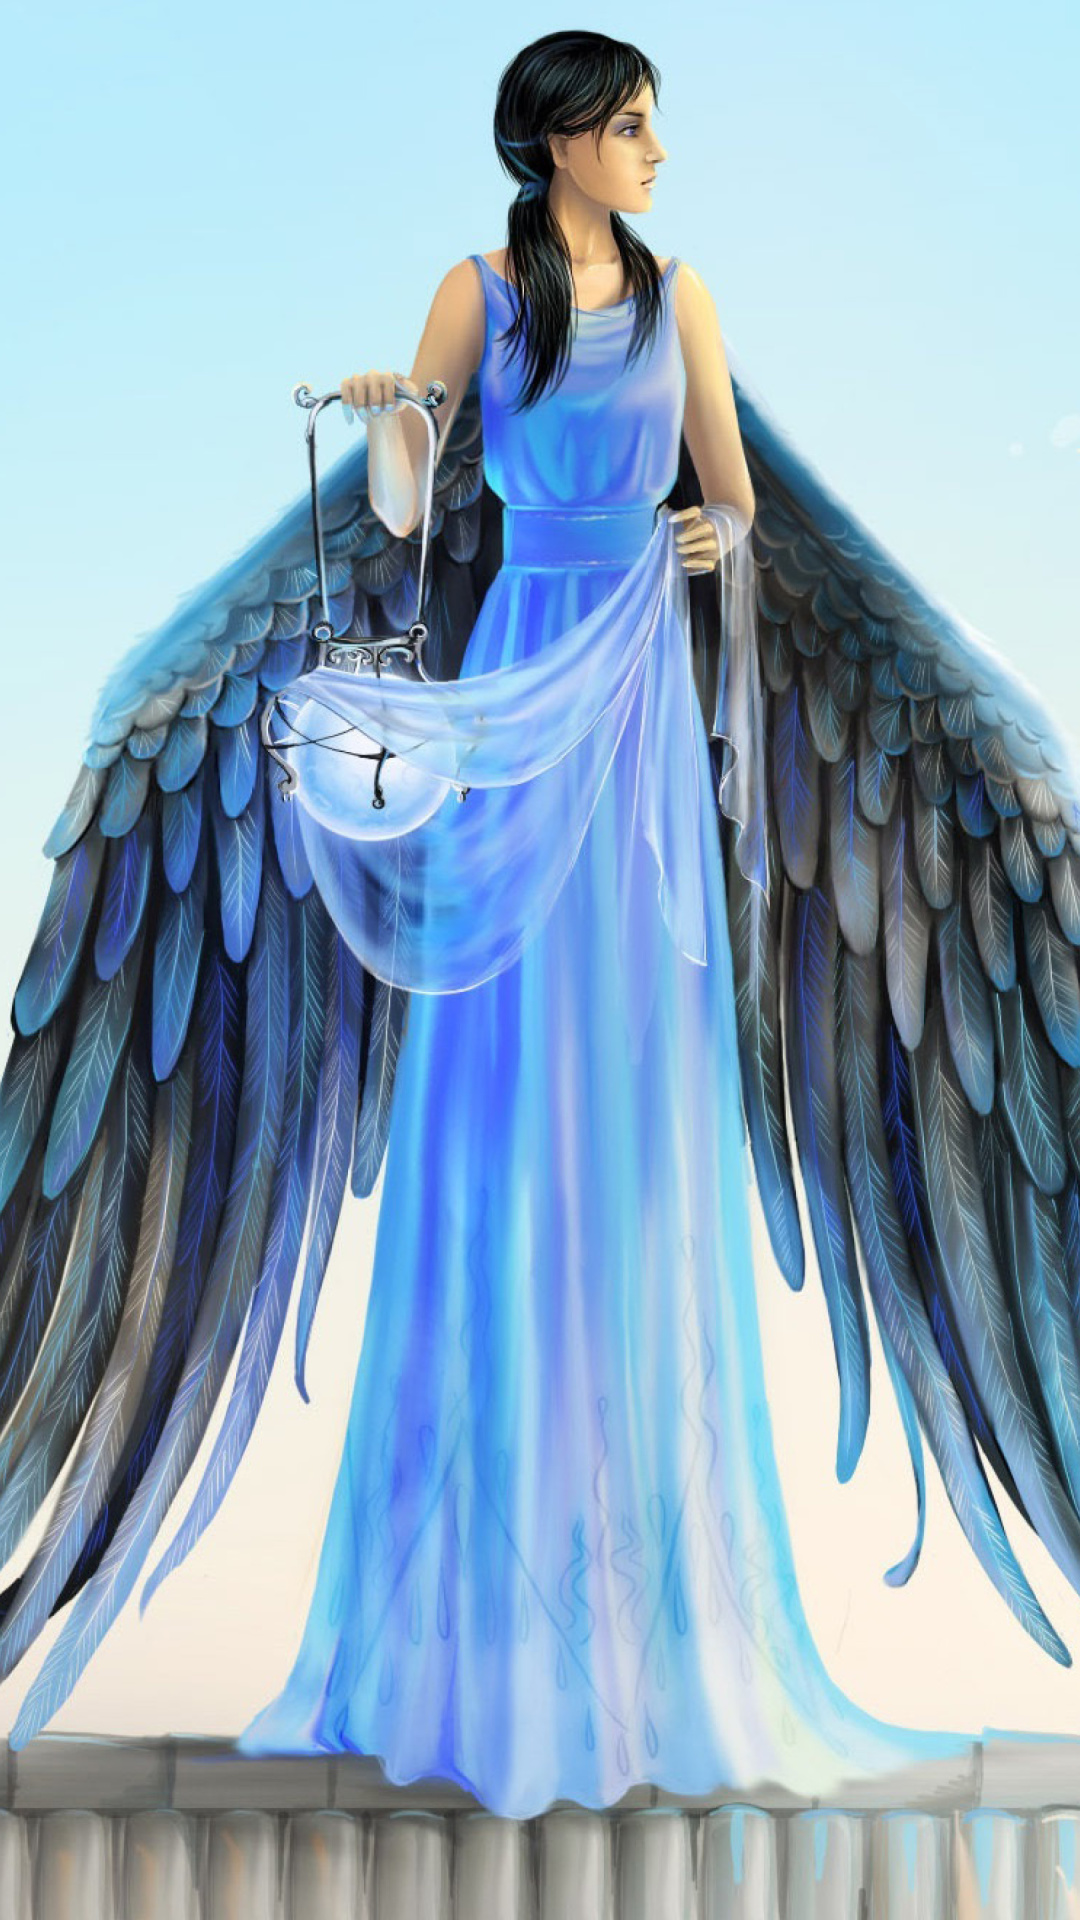 Angel with Wings wallpaper 1080x1920